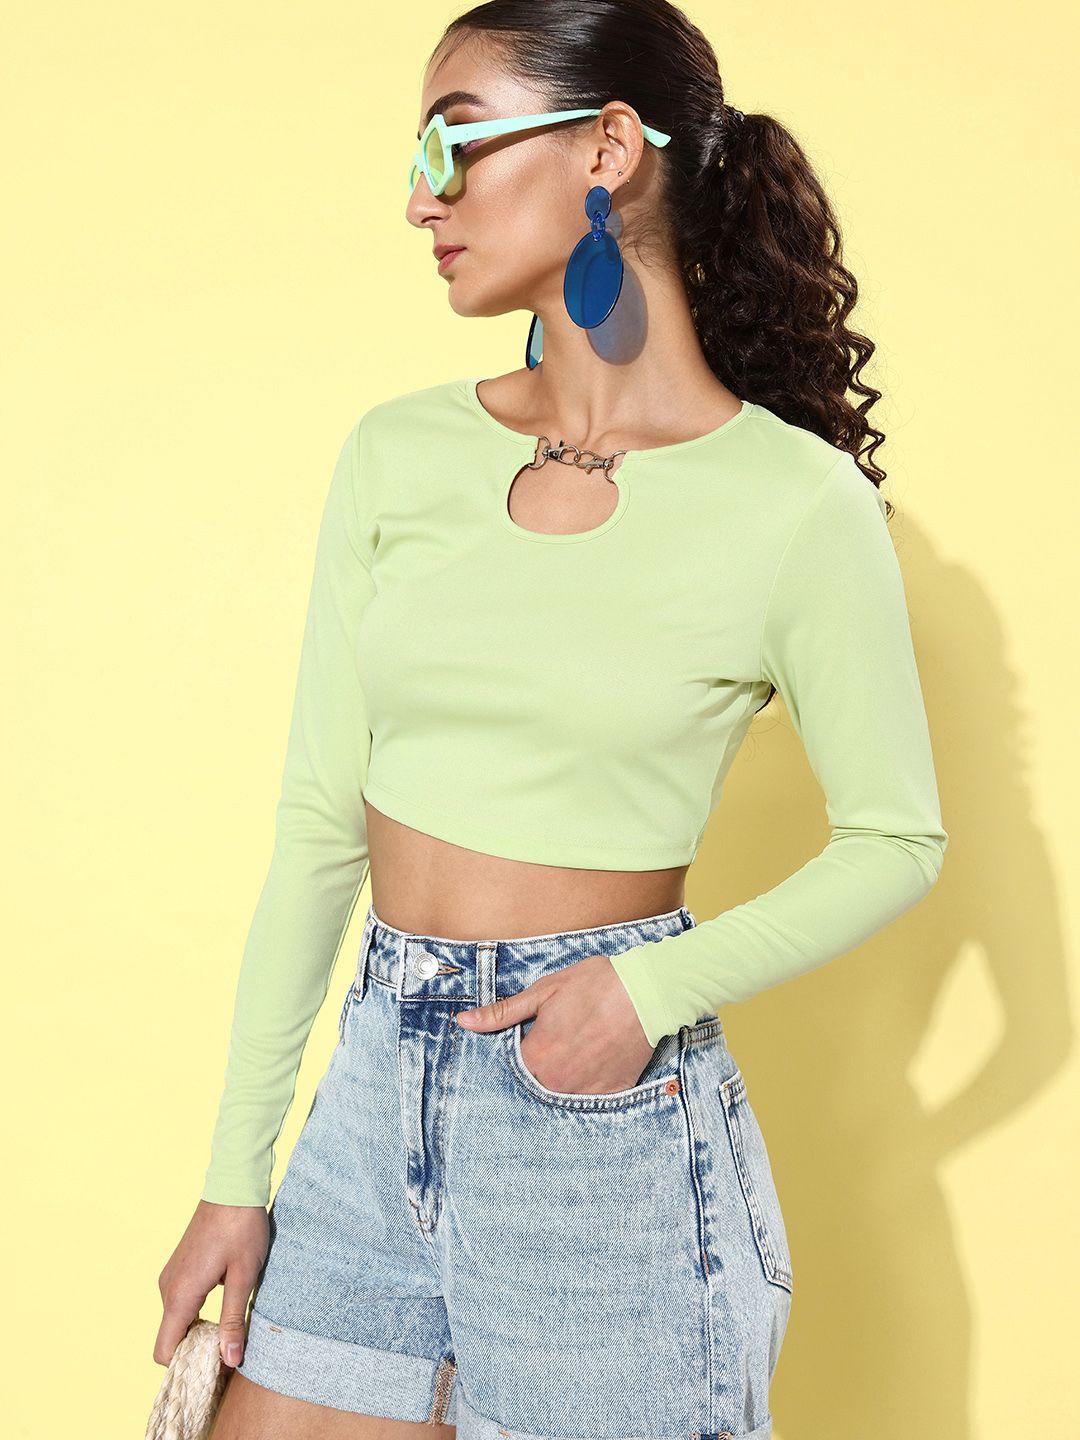 4wrd by dressberry solid keyhole neck crop top